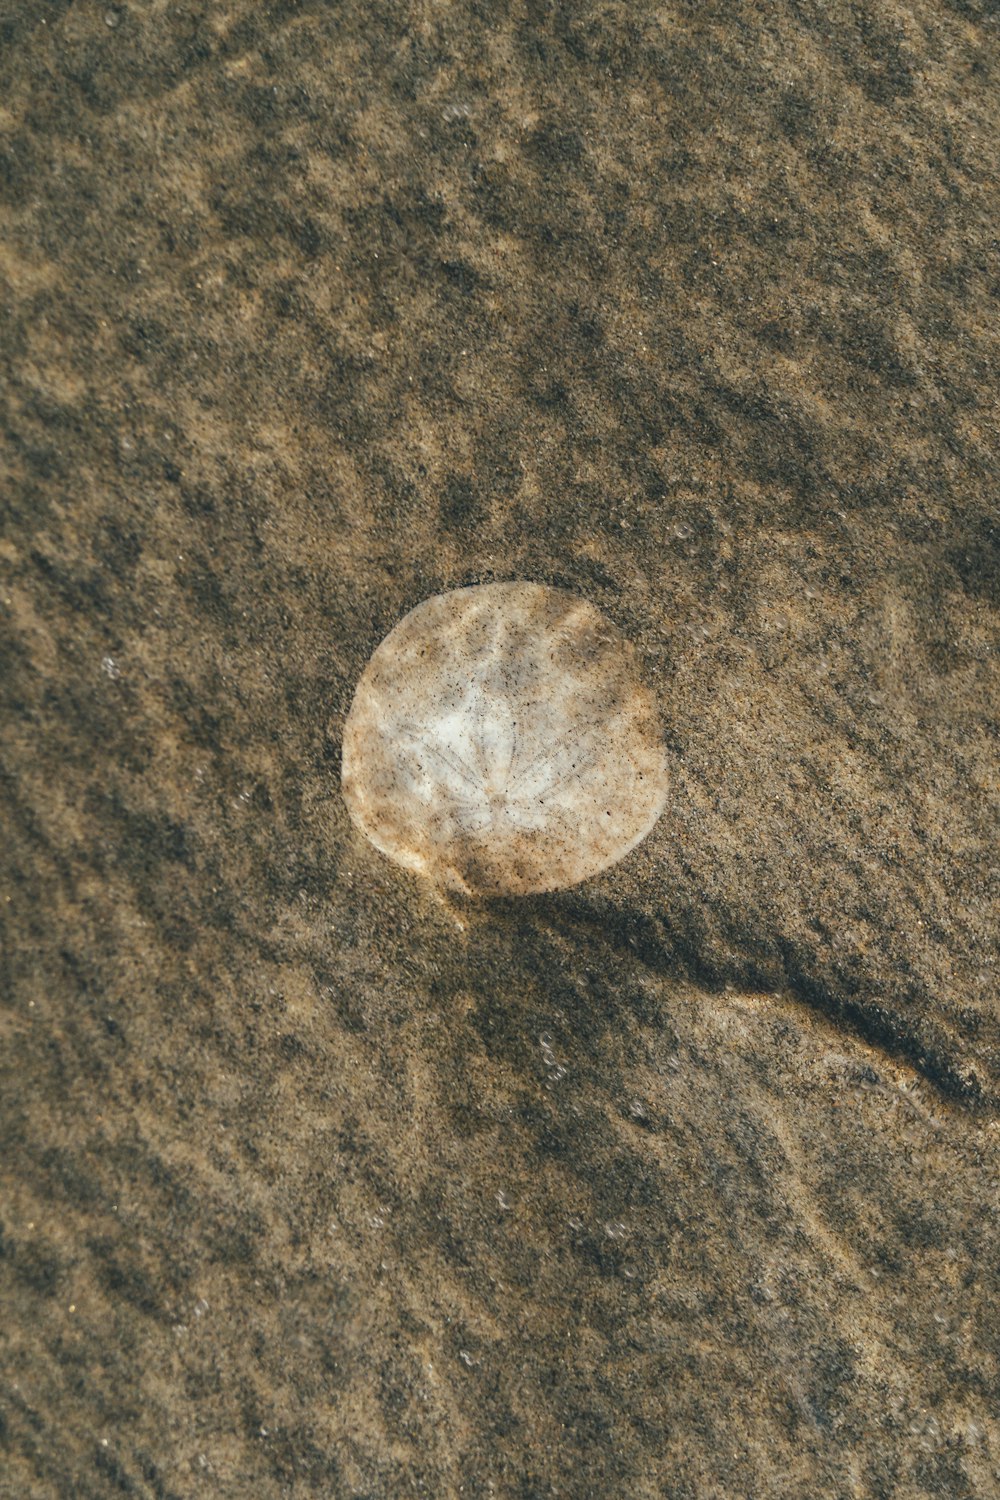 a rock sitting on top of a sandy beach